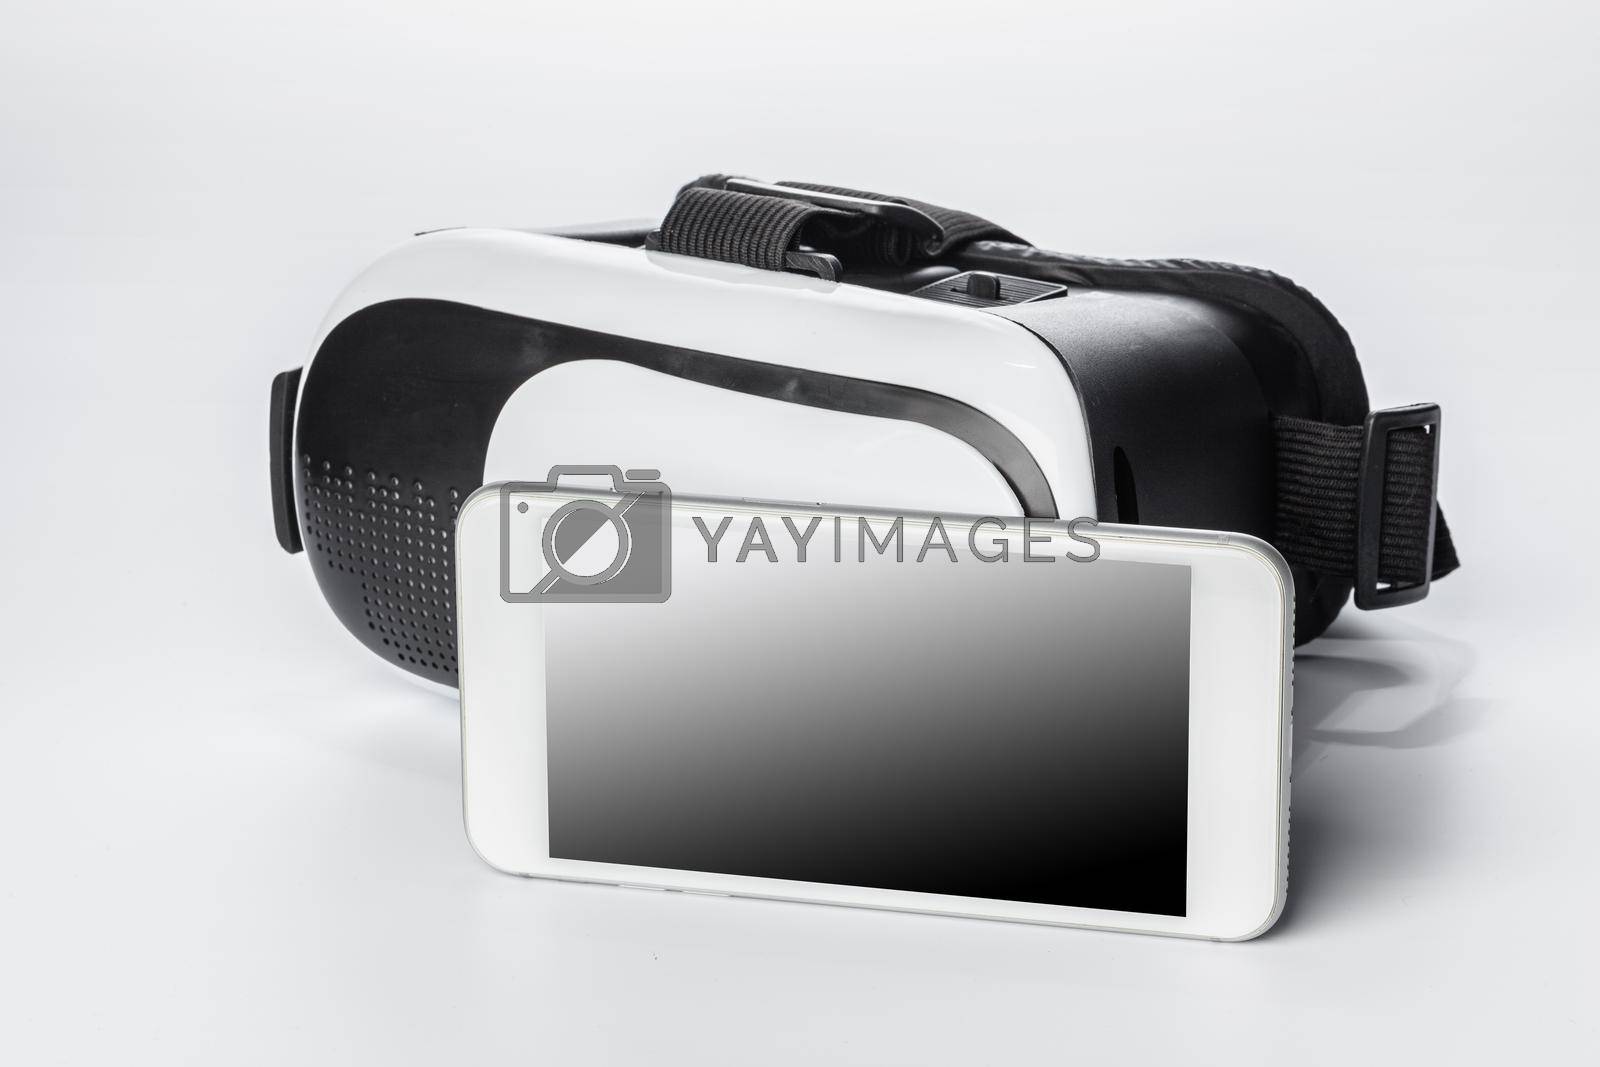 Royalty free image of VR Glasses and smartphone isolated on white background. by Fabrikasimf